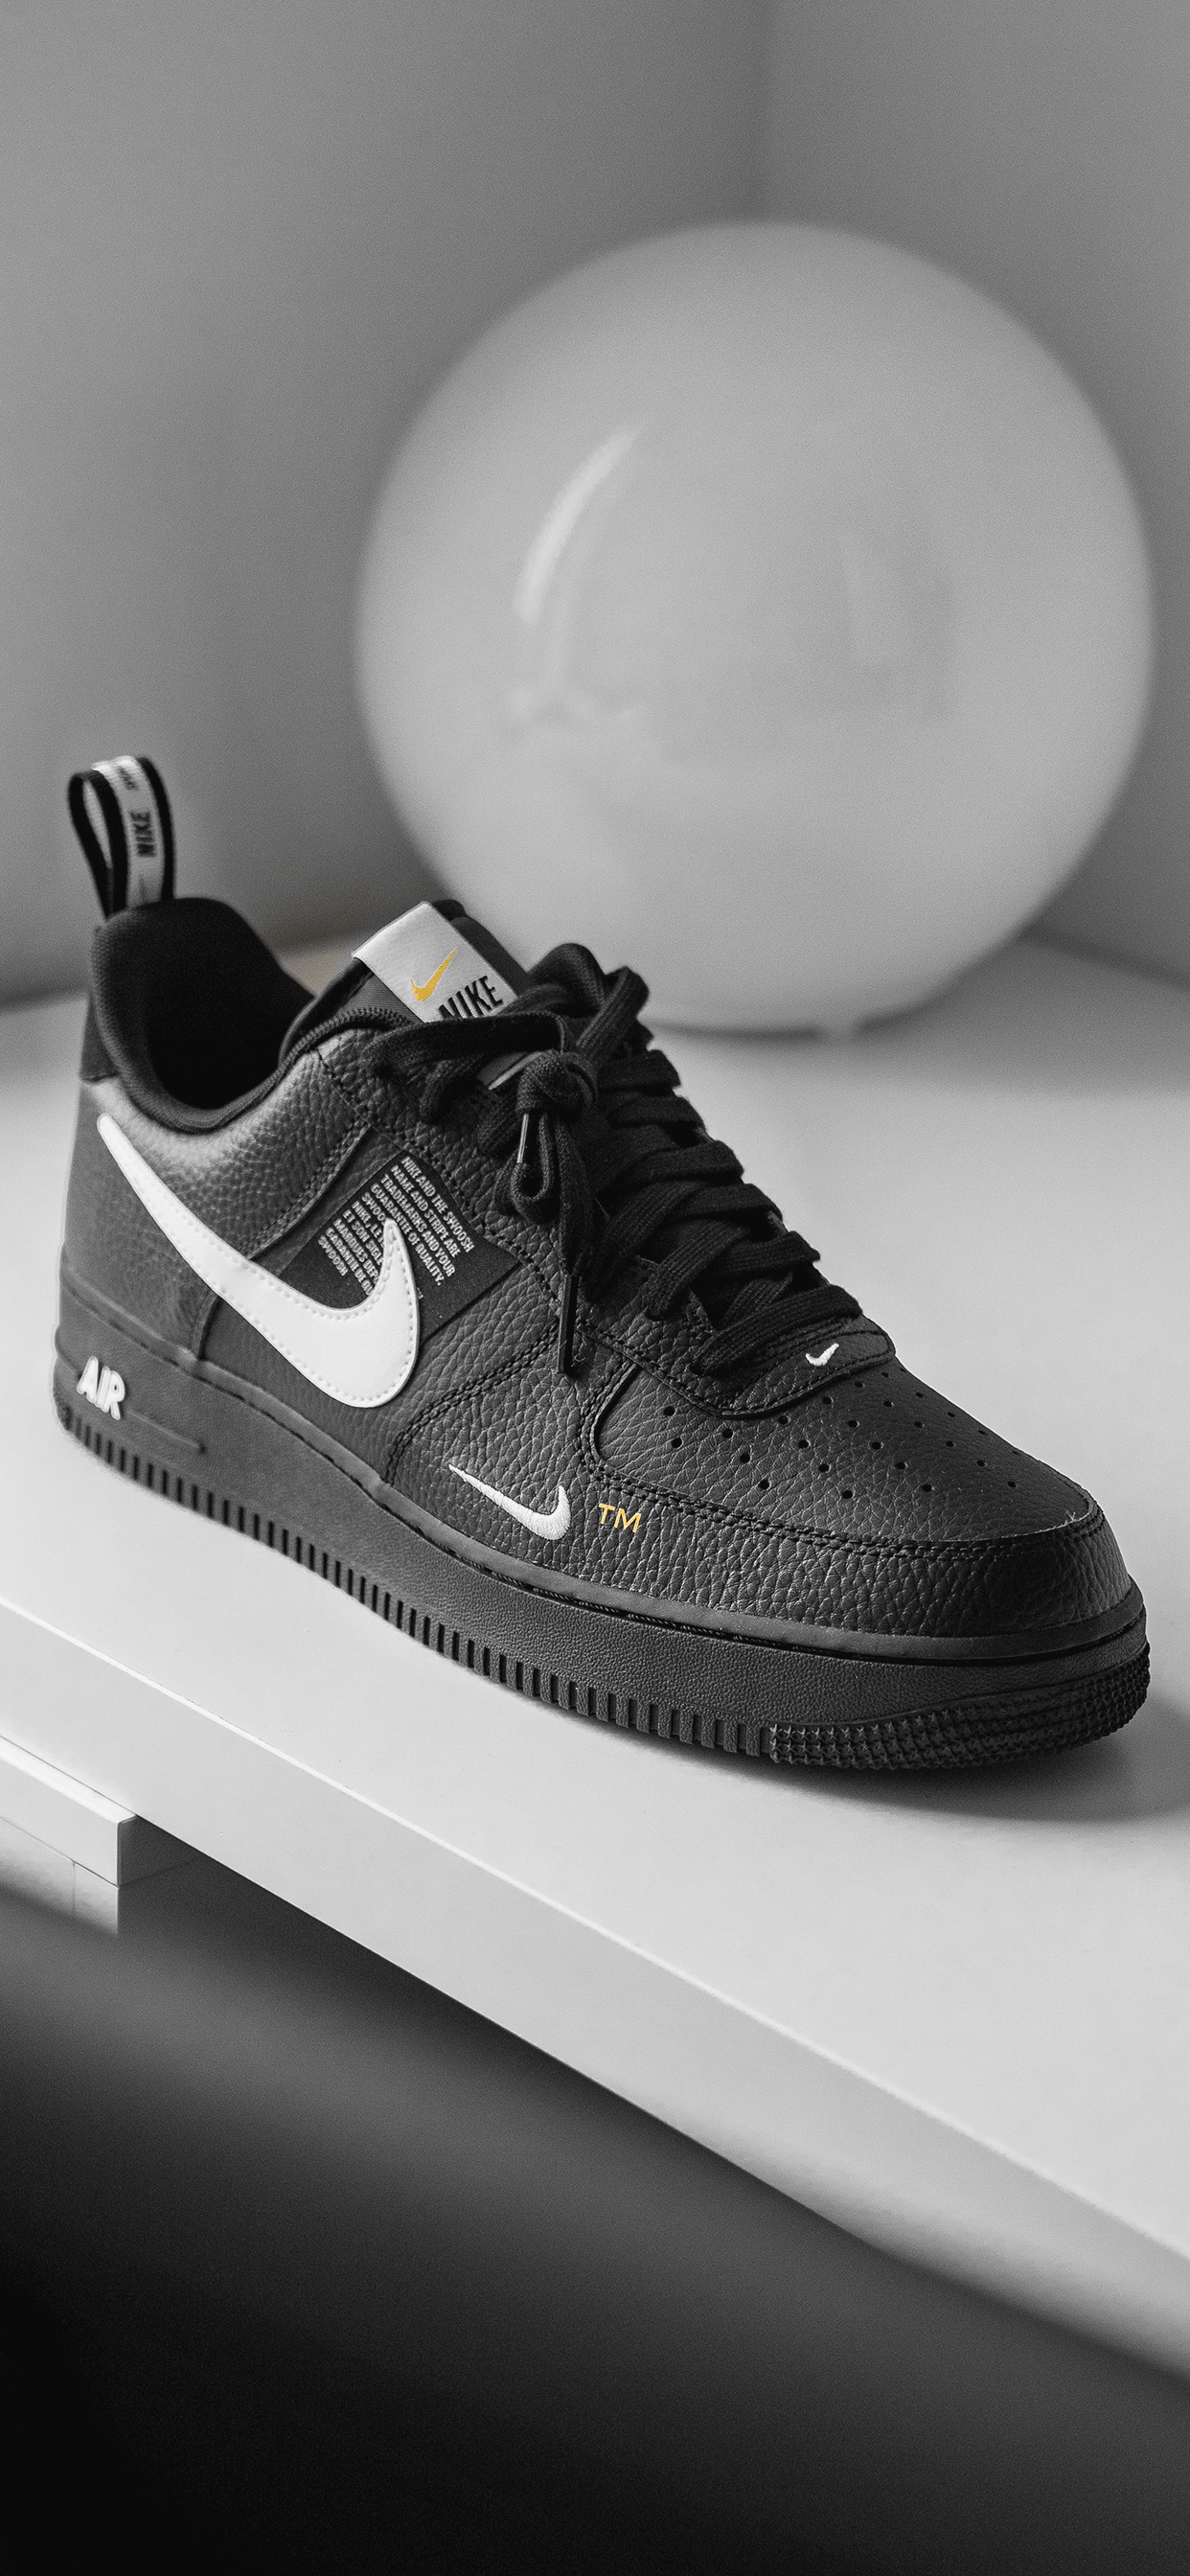 Air Force 1 Wallpaper Free Air Force 1 Background